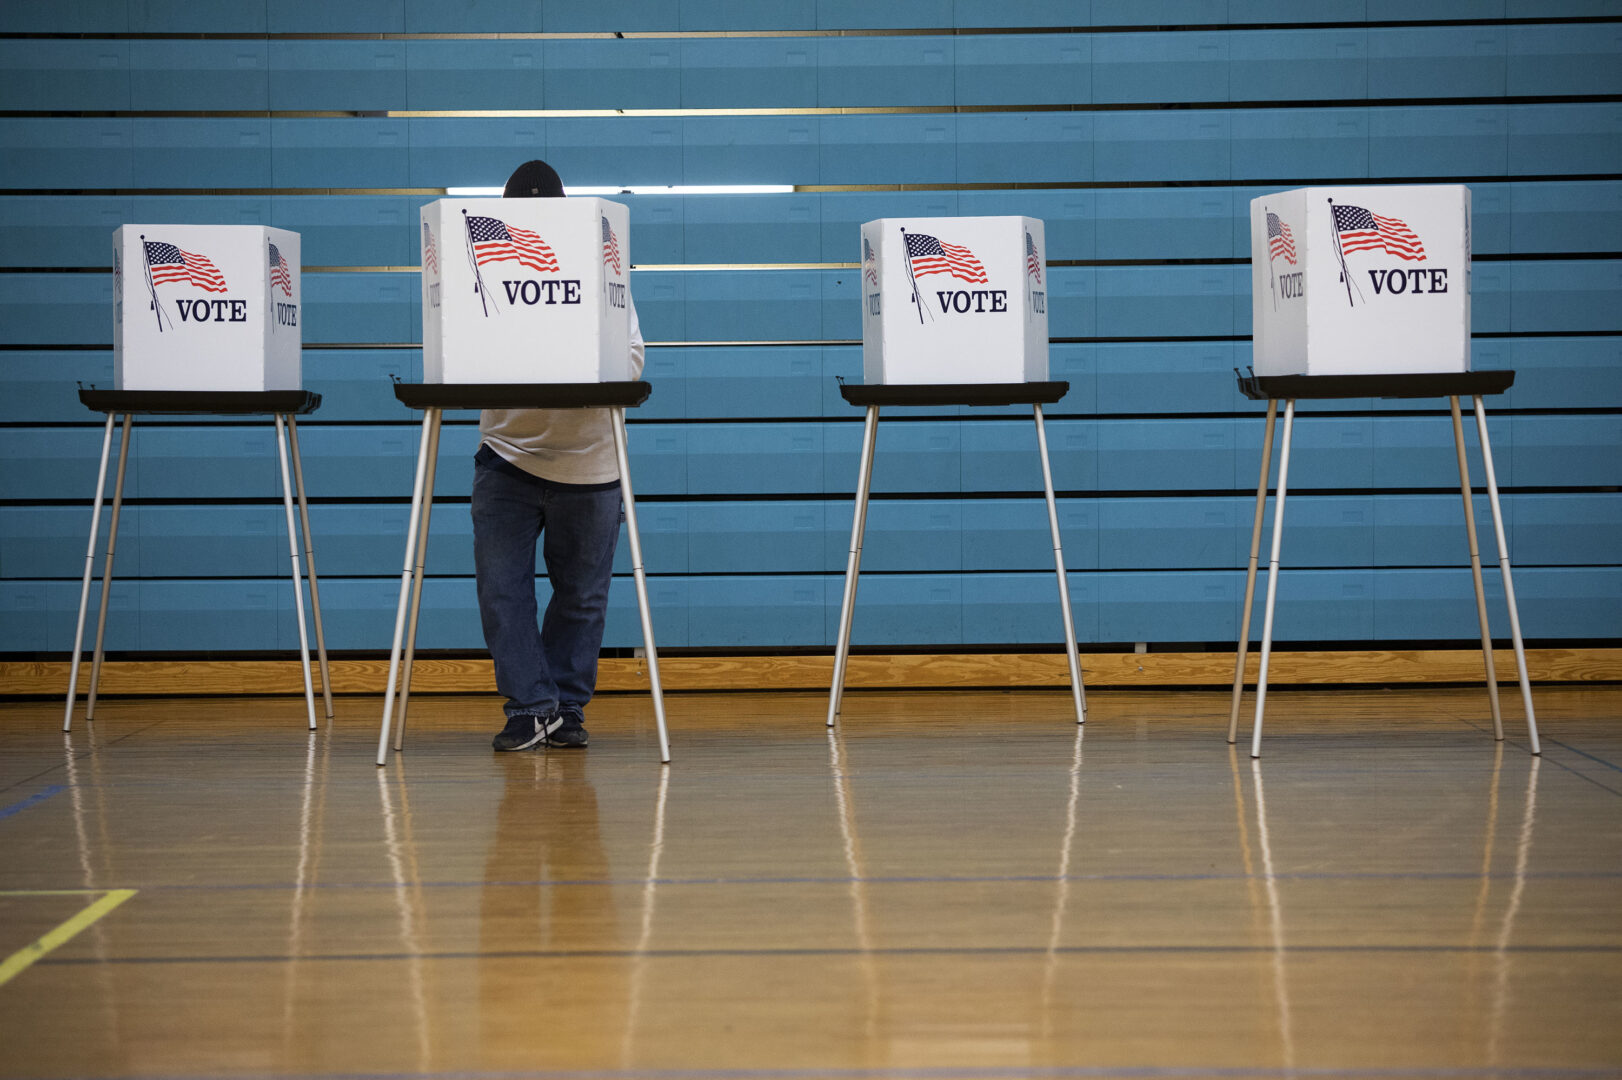 LANSING, MI - NOVEMBER 08: A man votes in the 2022 midterm election on Election Day on November 8, 2022 in Lansing, Michigan. After months of candidates campaigning, Americans are voting in the midterm elections to decide close races across the nation. (Photo by Bill Pugliano/Getty Images)